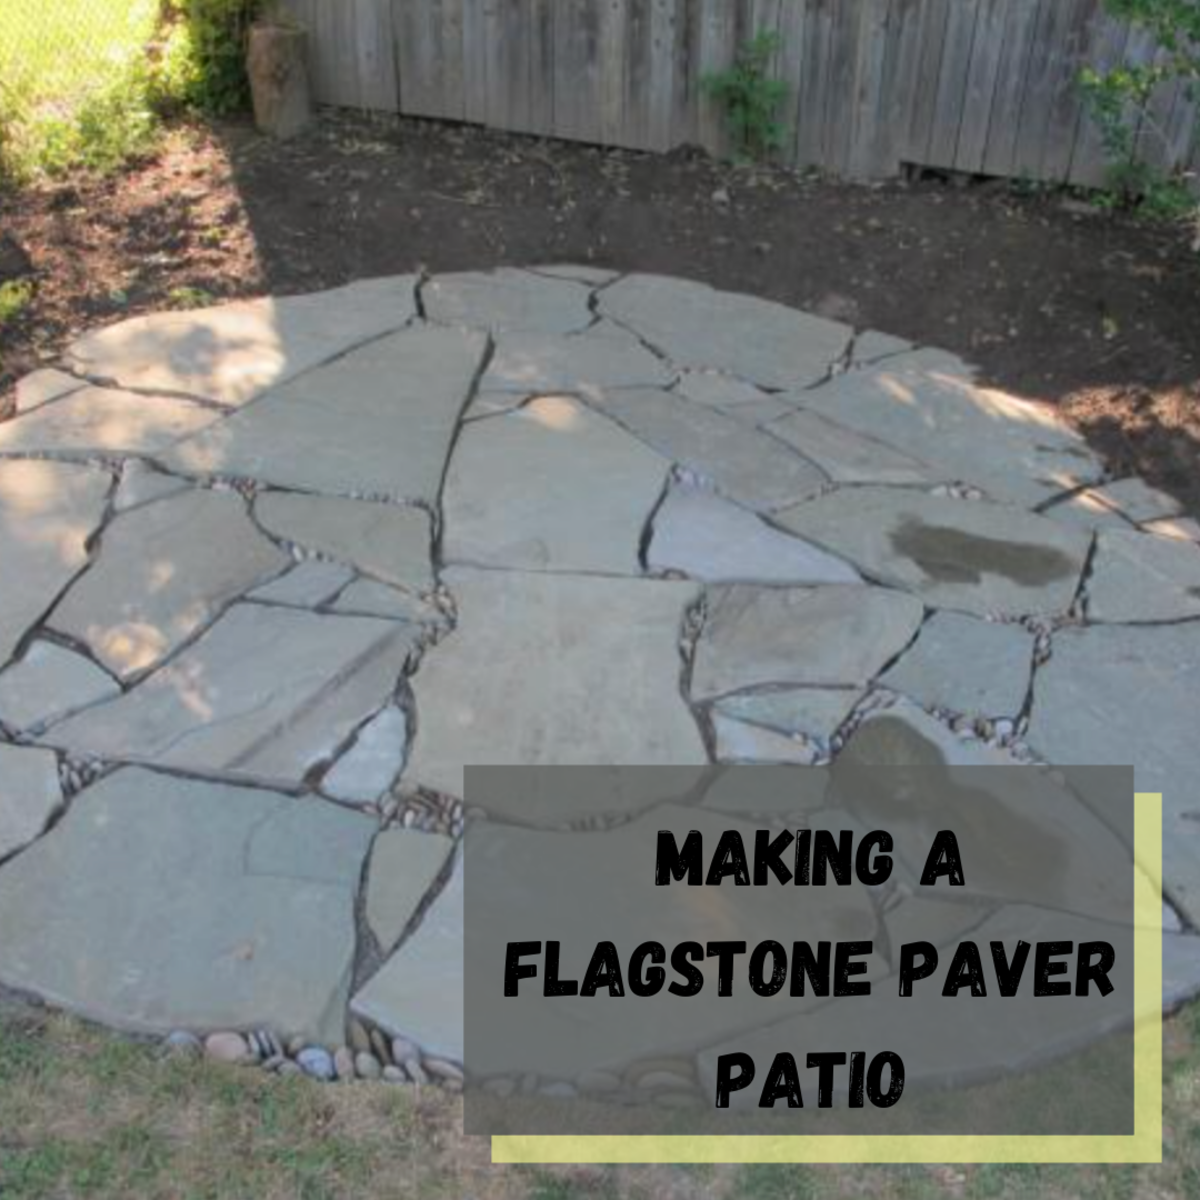 This article will guide you through the process of creating your own flagstone paver patio